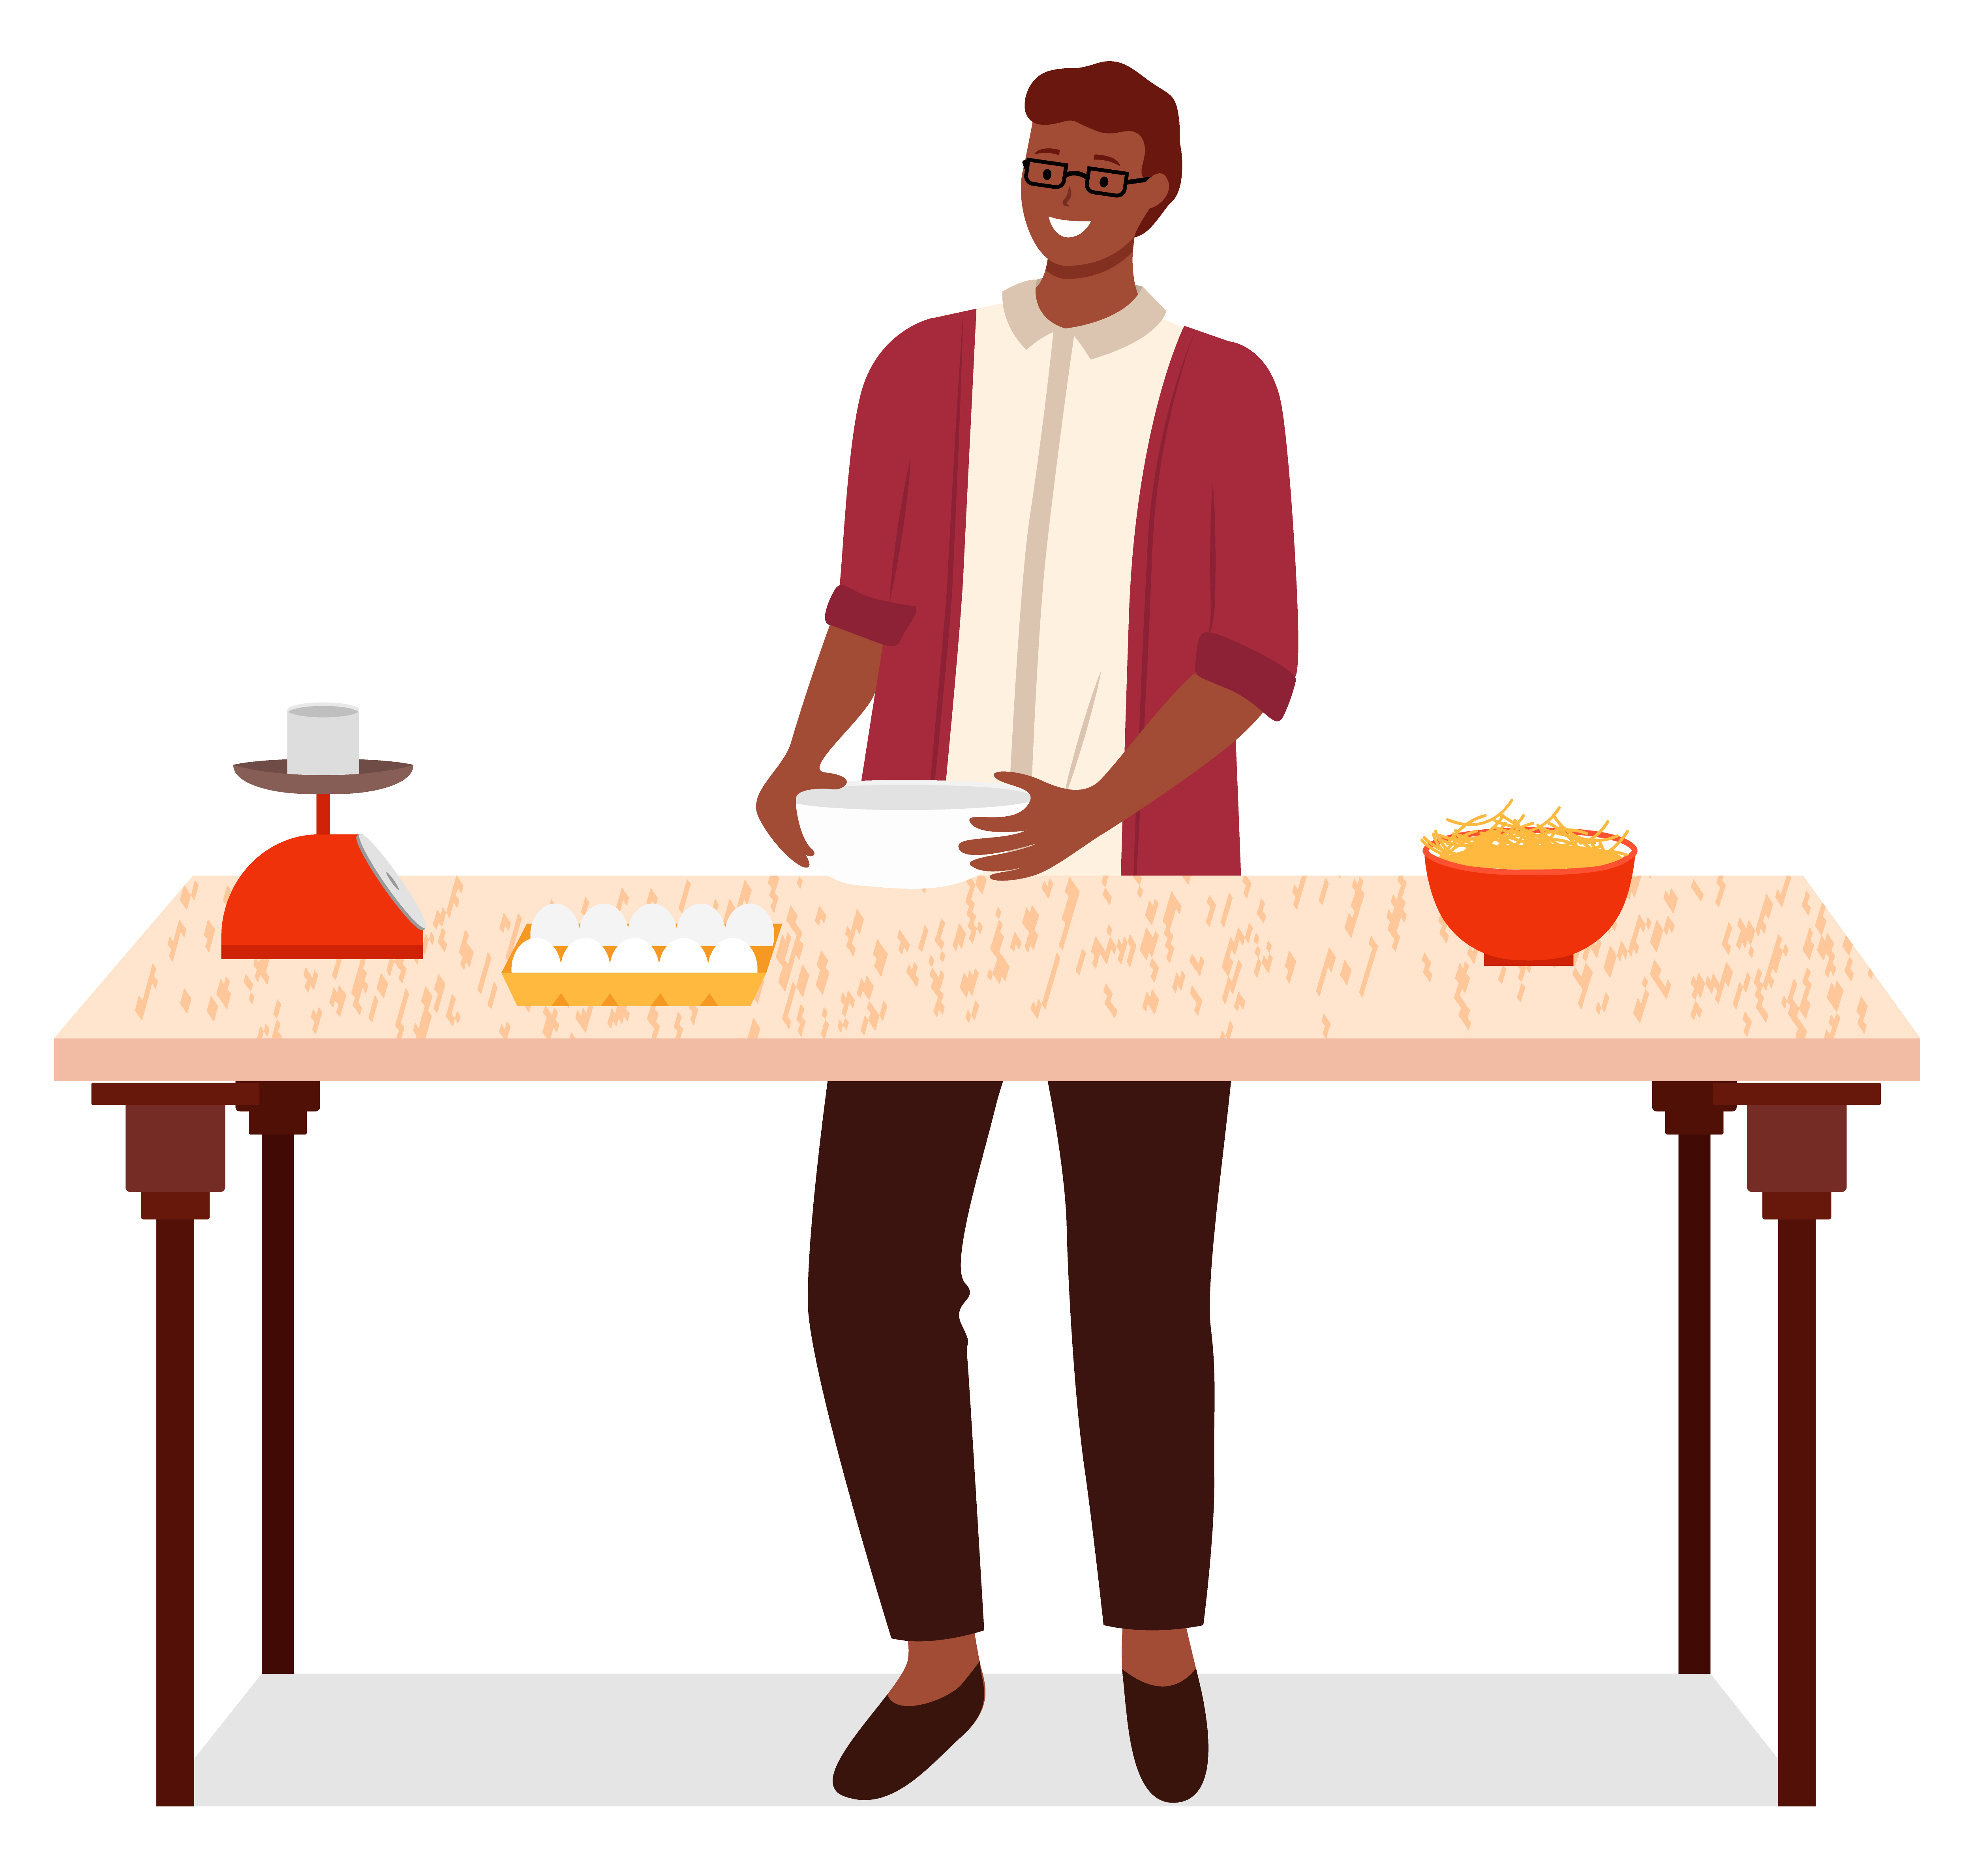 Man stand by table on kitchen. Kitchenware and products like eggs on desk. Guy preparing food for cooking. Weighing scale to measure weight of ingredients. Vector illustration of cooking process. Man Preparing Ingredients for Cooking, Kitchen